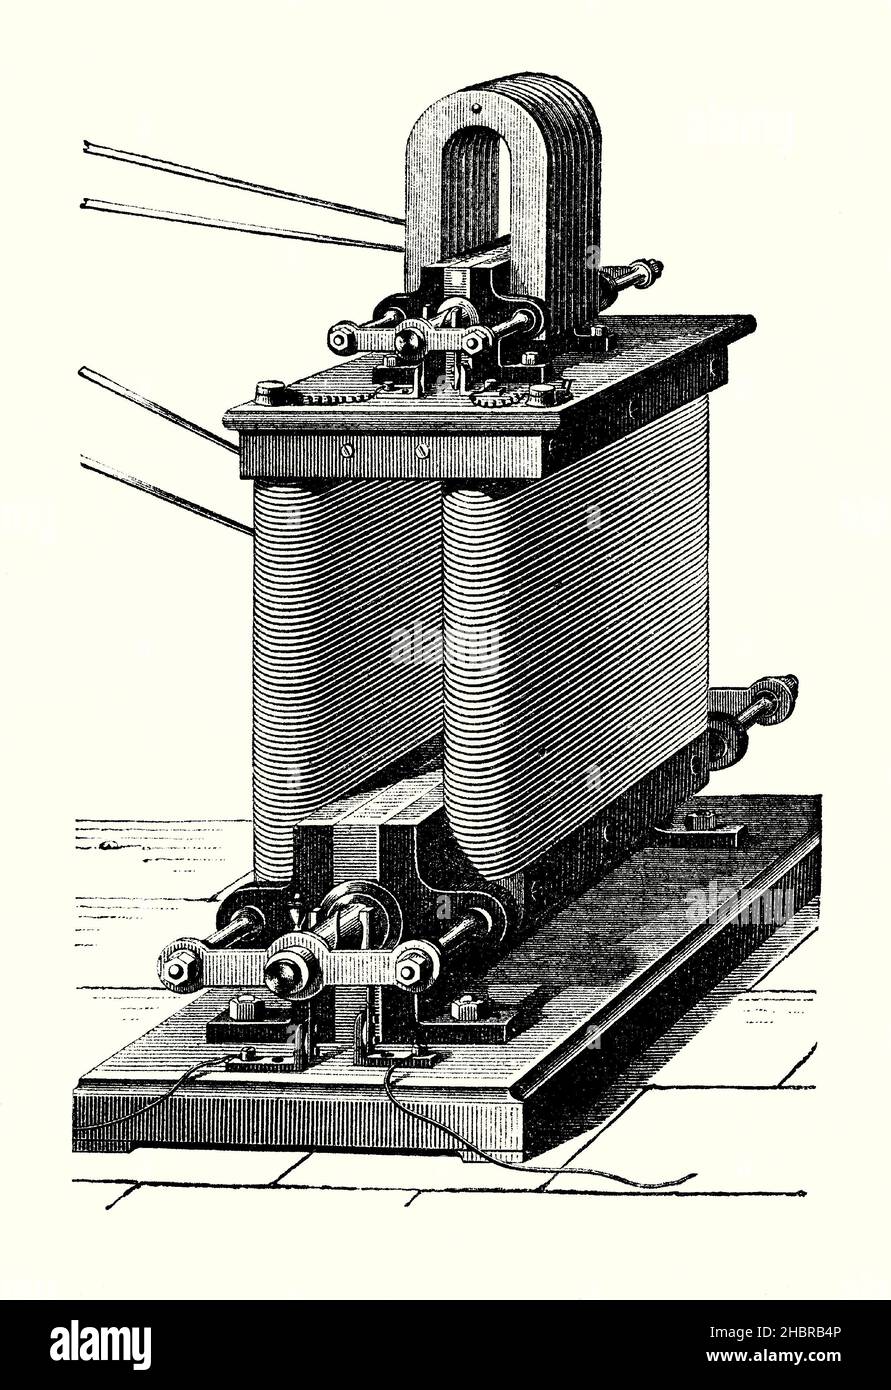 An old engraving of Wilde’s Machine, a magneto-electric device of the mid-1800s. It is from a Victorian book of the 1890s on discoveries and inventions during the 1800s. Here a small magneto (top) powers the field coils of a larger alternator below. Henry Wilde (1833–1919), from Manchester, England, used his self-made fortune to indulge his interest in electrical engineering. Wilde invented the powerful dynamo-electric machine, or self-energising dynamo. Wilde was fond of spectacular demonstrations, such as the ability of his machine to melt iron bars. Stock Photo